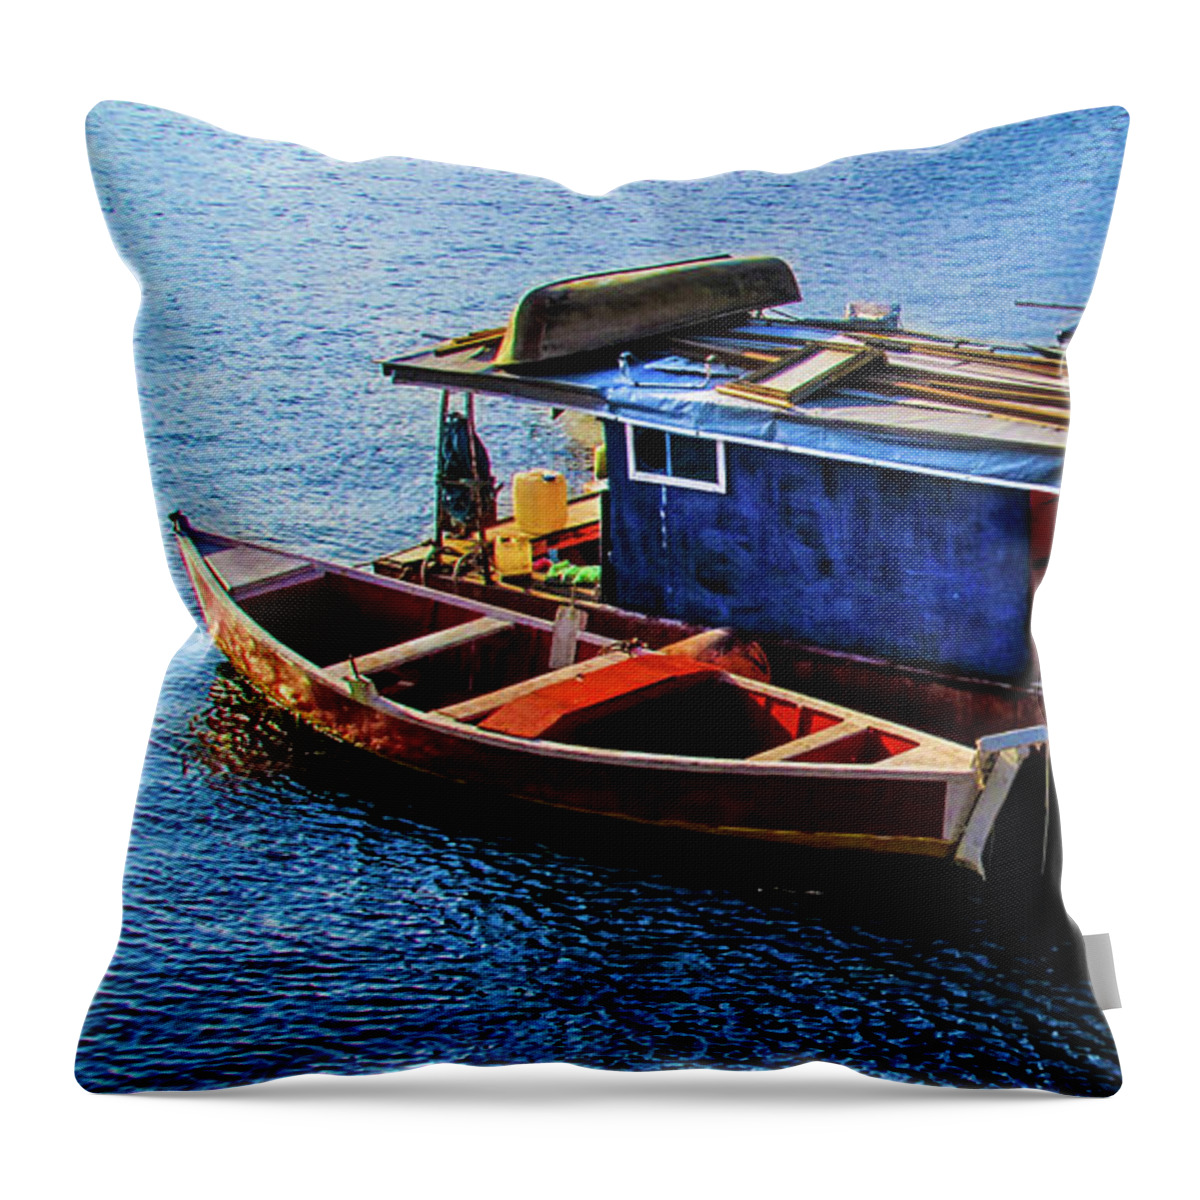 Riodejaneir Throw Pillow featuring the photograph Boat House by Cesar Vieira